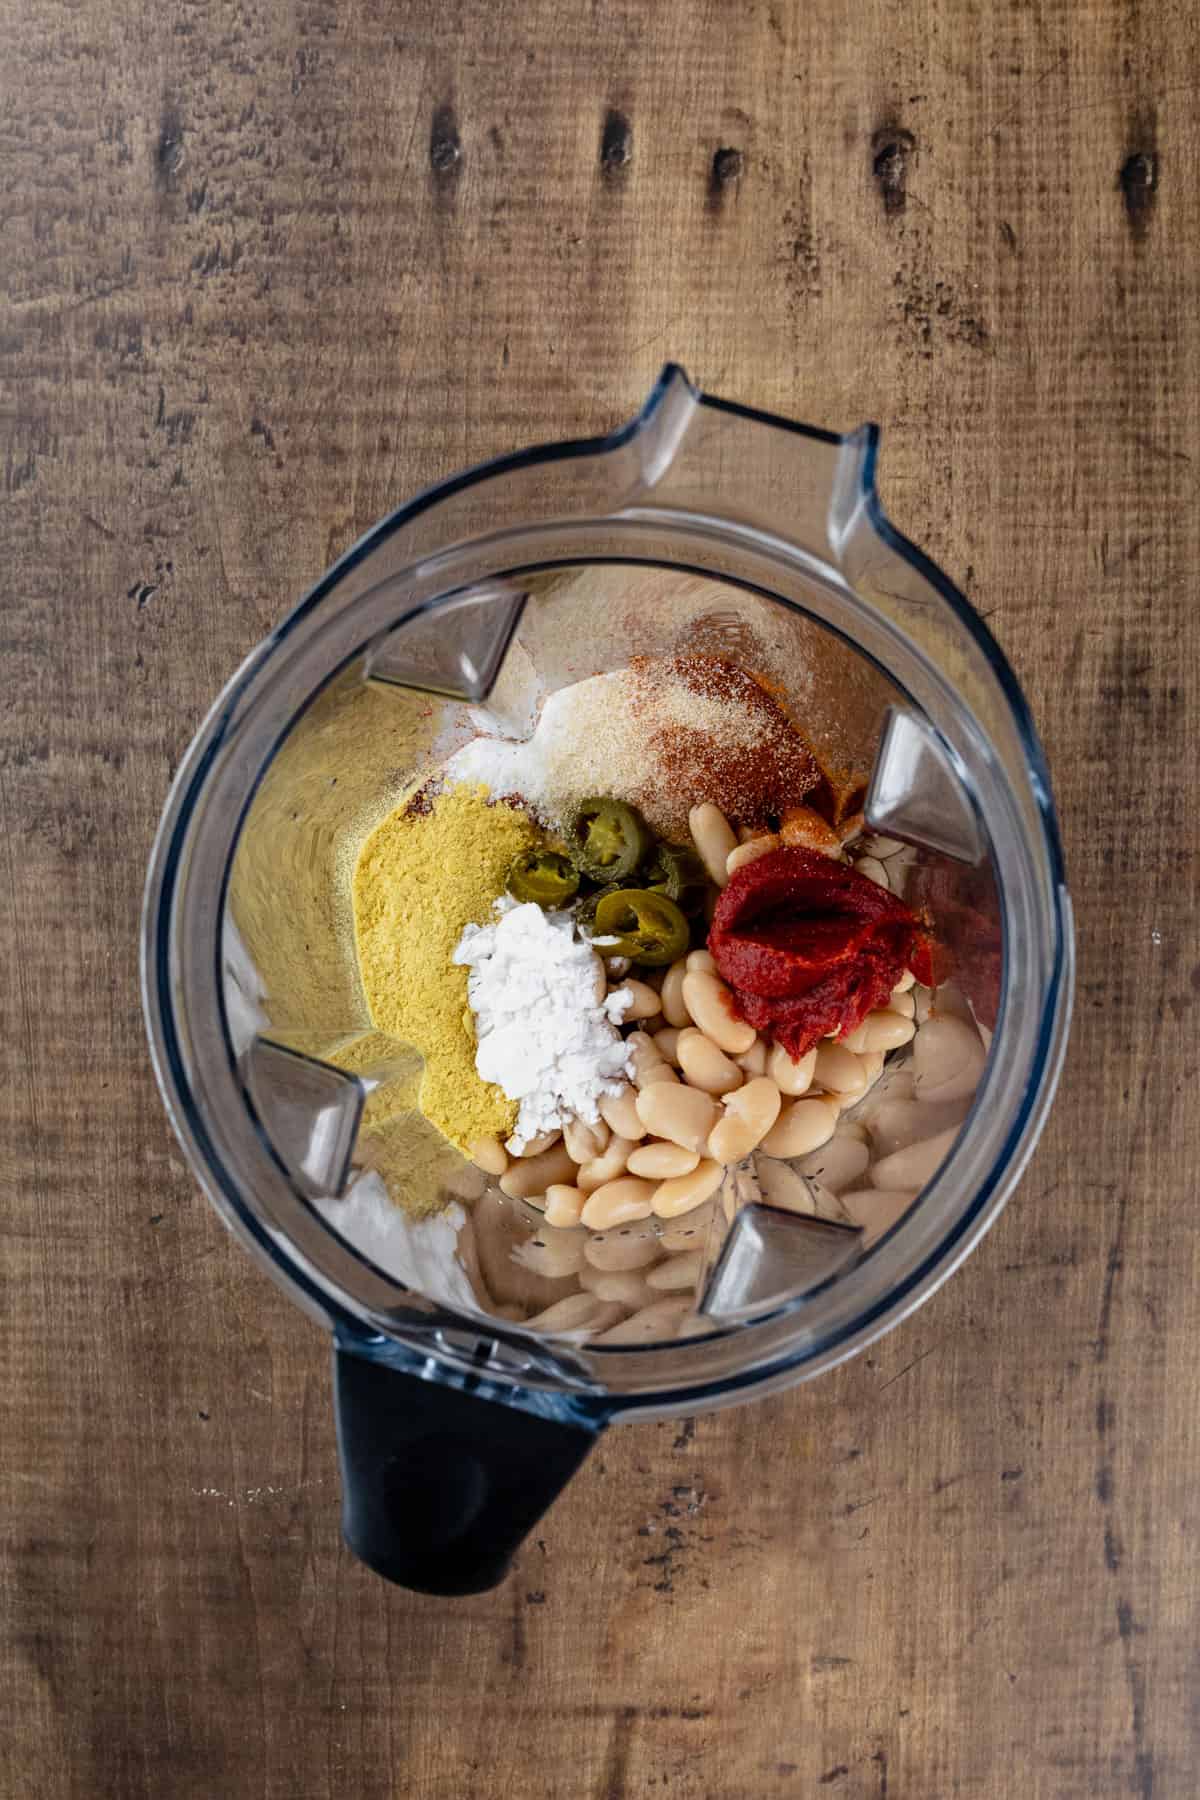 A blender on a wood tabletop is filled with the ingredients to make dairy free queso. This is before the ingredients have been blended so you can see all the ingredients.